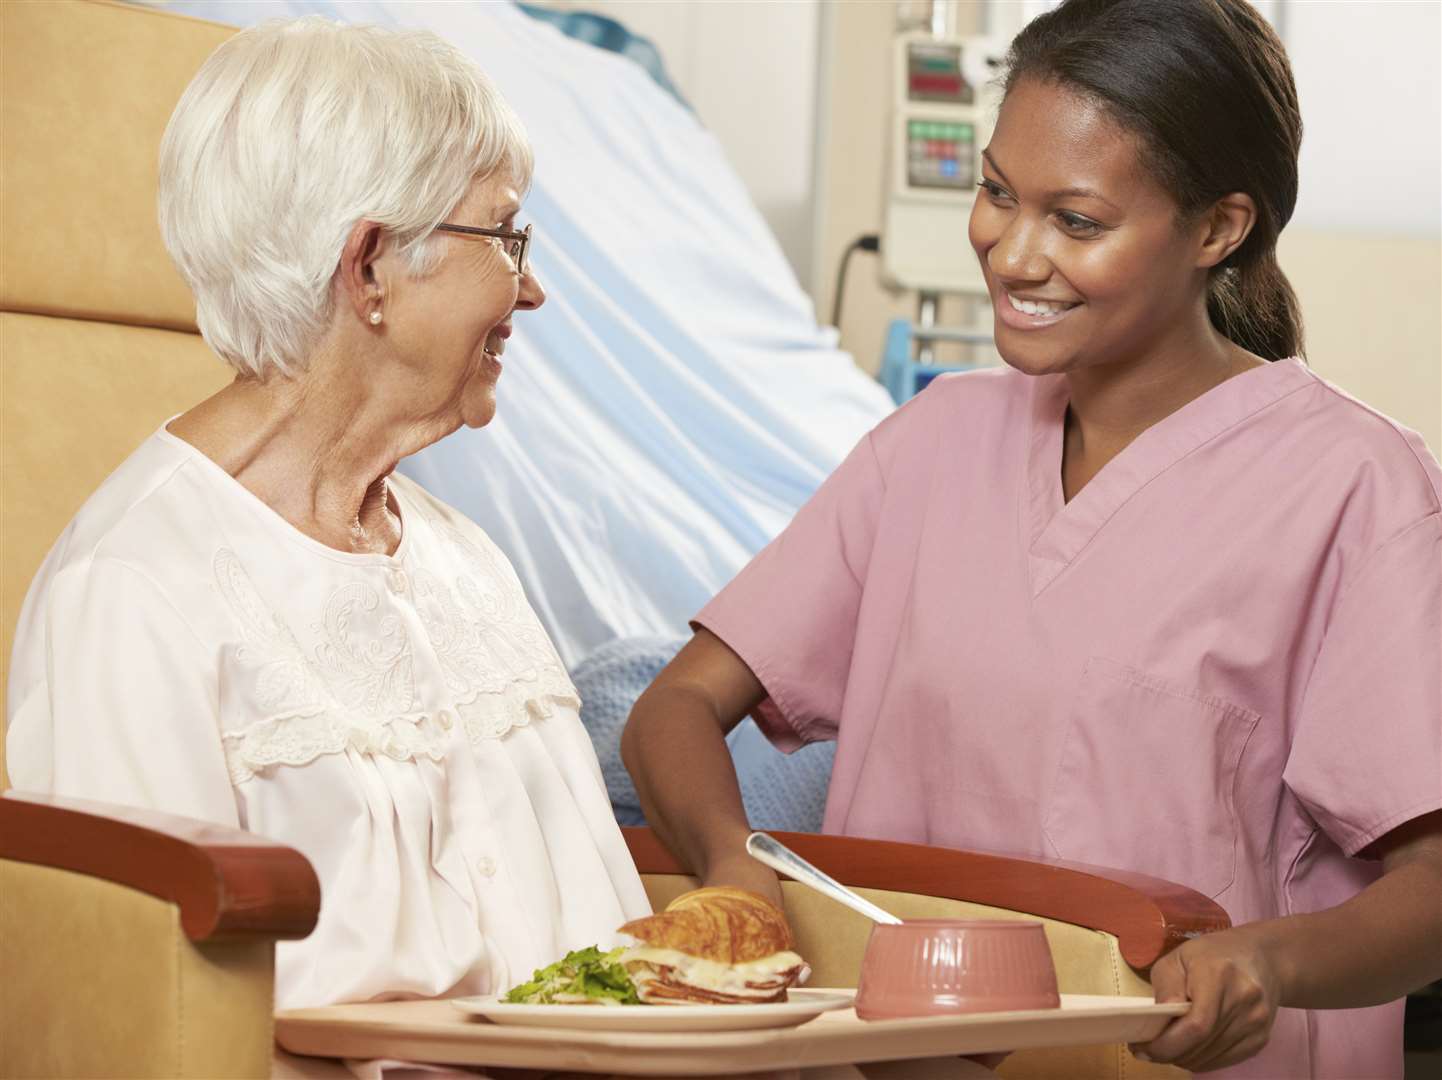 Nurse serving a meal to a patient. Stock picture